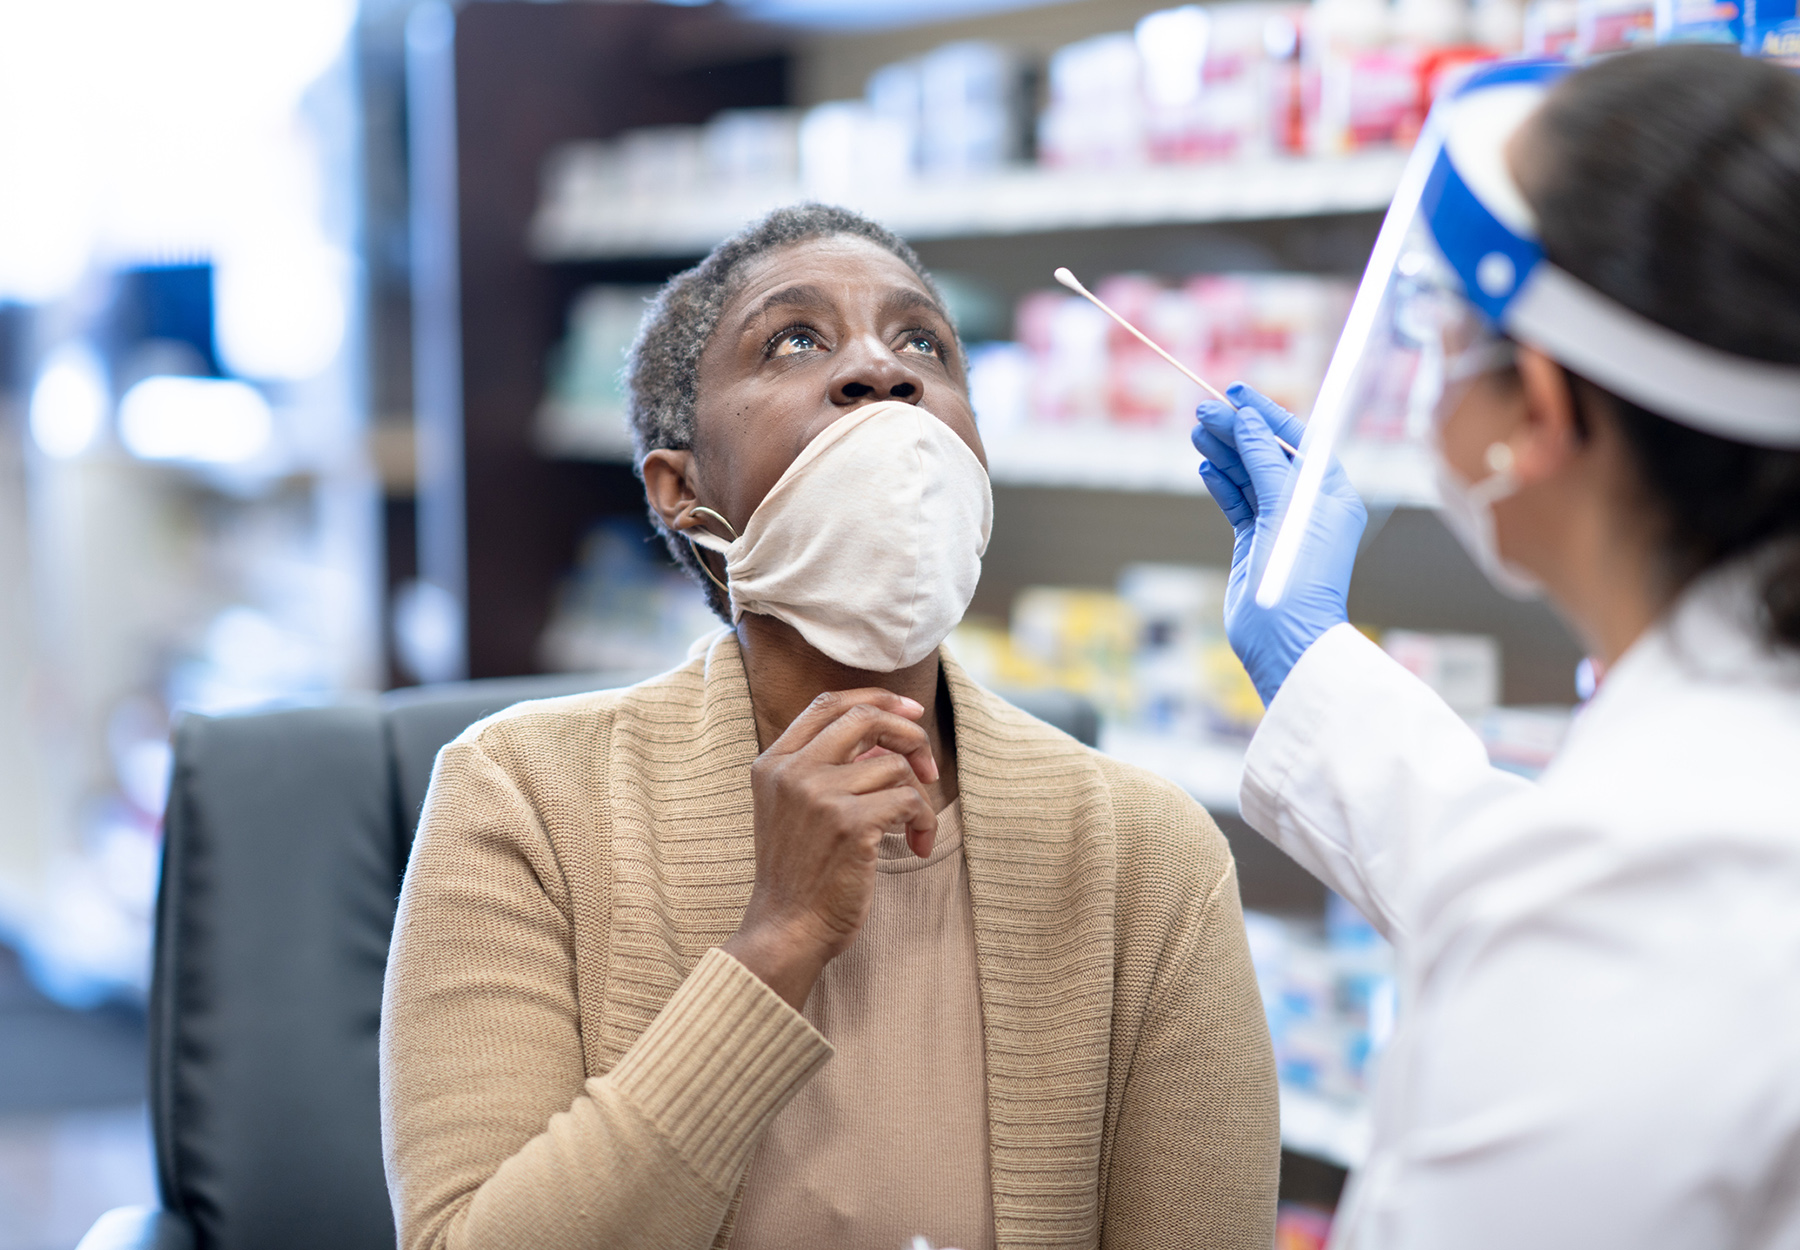 Senior African American female getting nasal swab from a healthcare professional for a COVID-19 test. Stock photo.